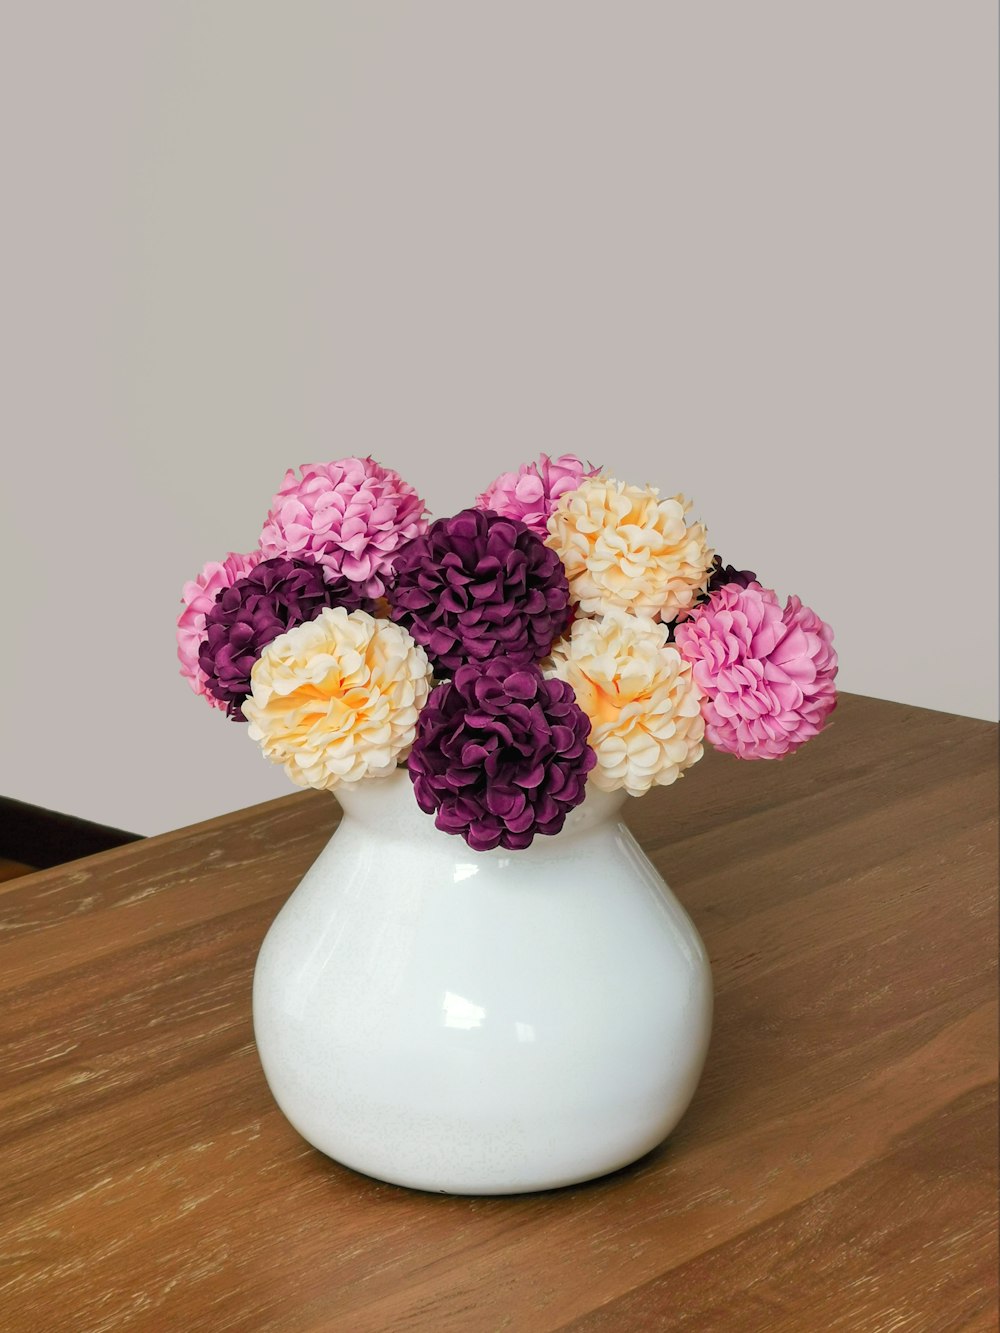 a white vase filled with colorful flowers on top of a wooden table